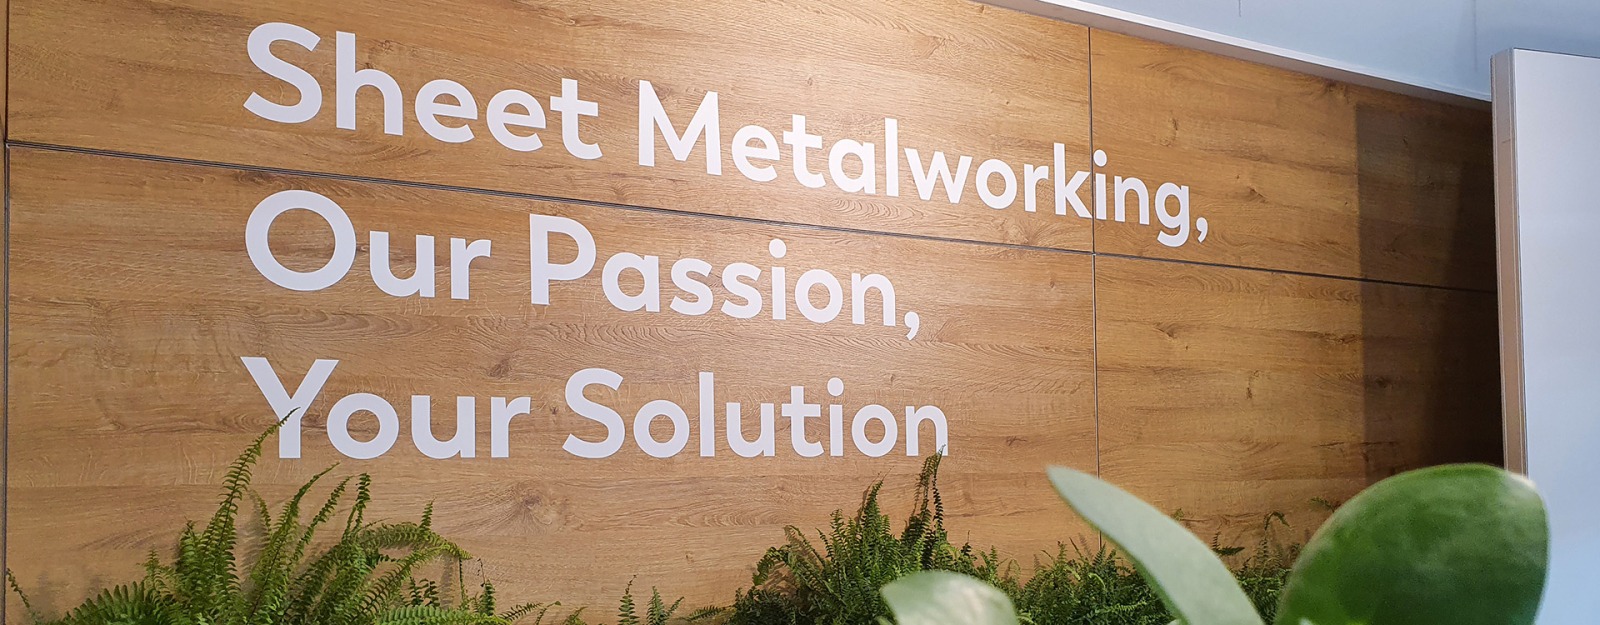 Sheet Metalworking, Our Passion, Your Solution